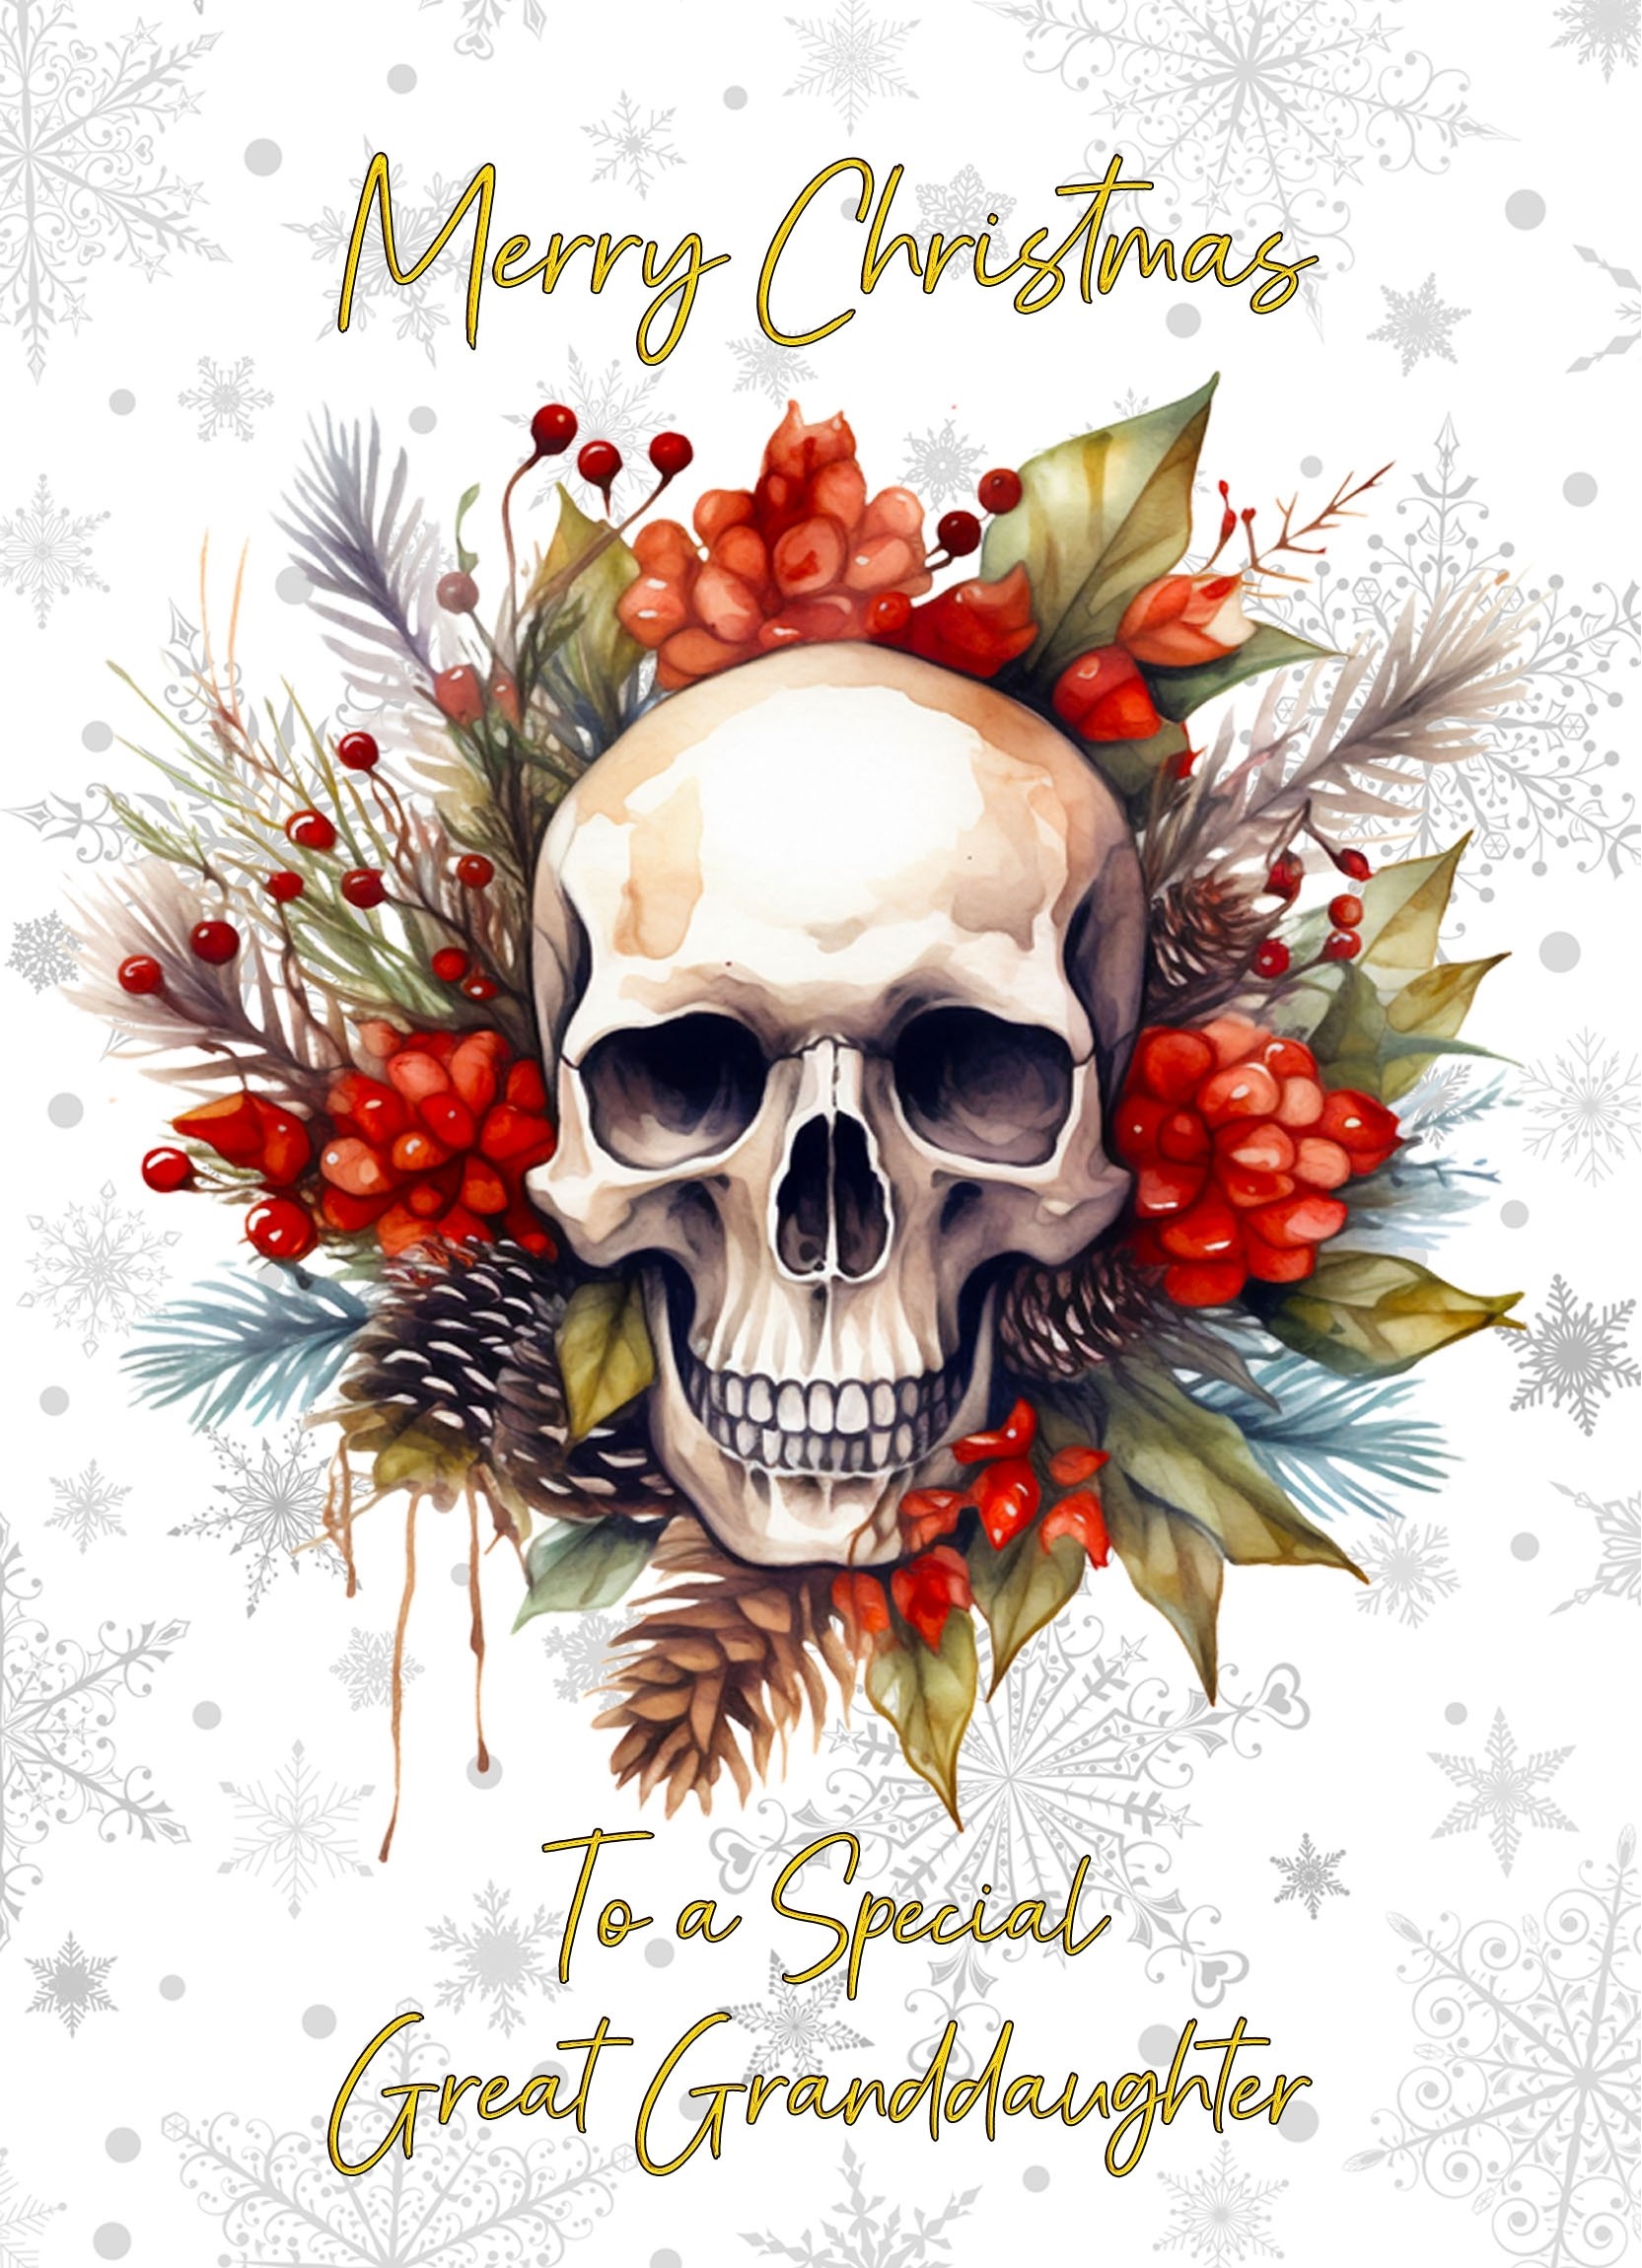 Christmas Card For Great Granddaughter (Gothic Fantasy Skull Wreath)